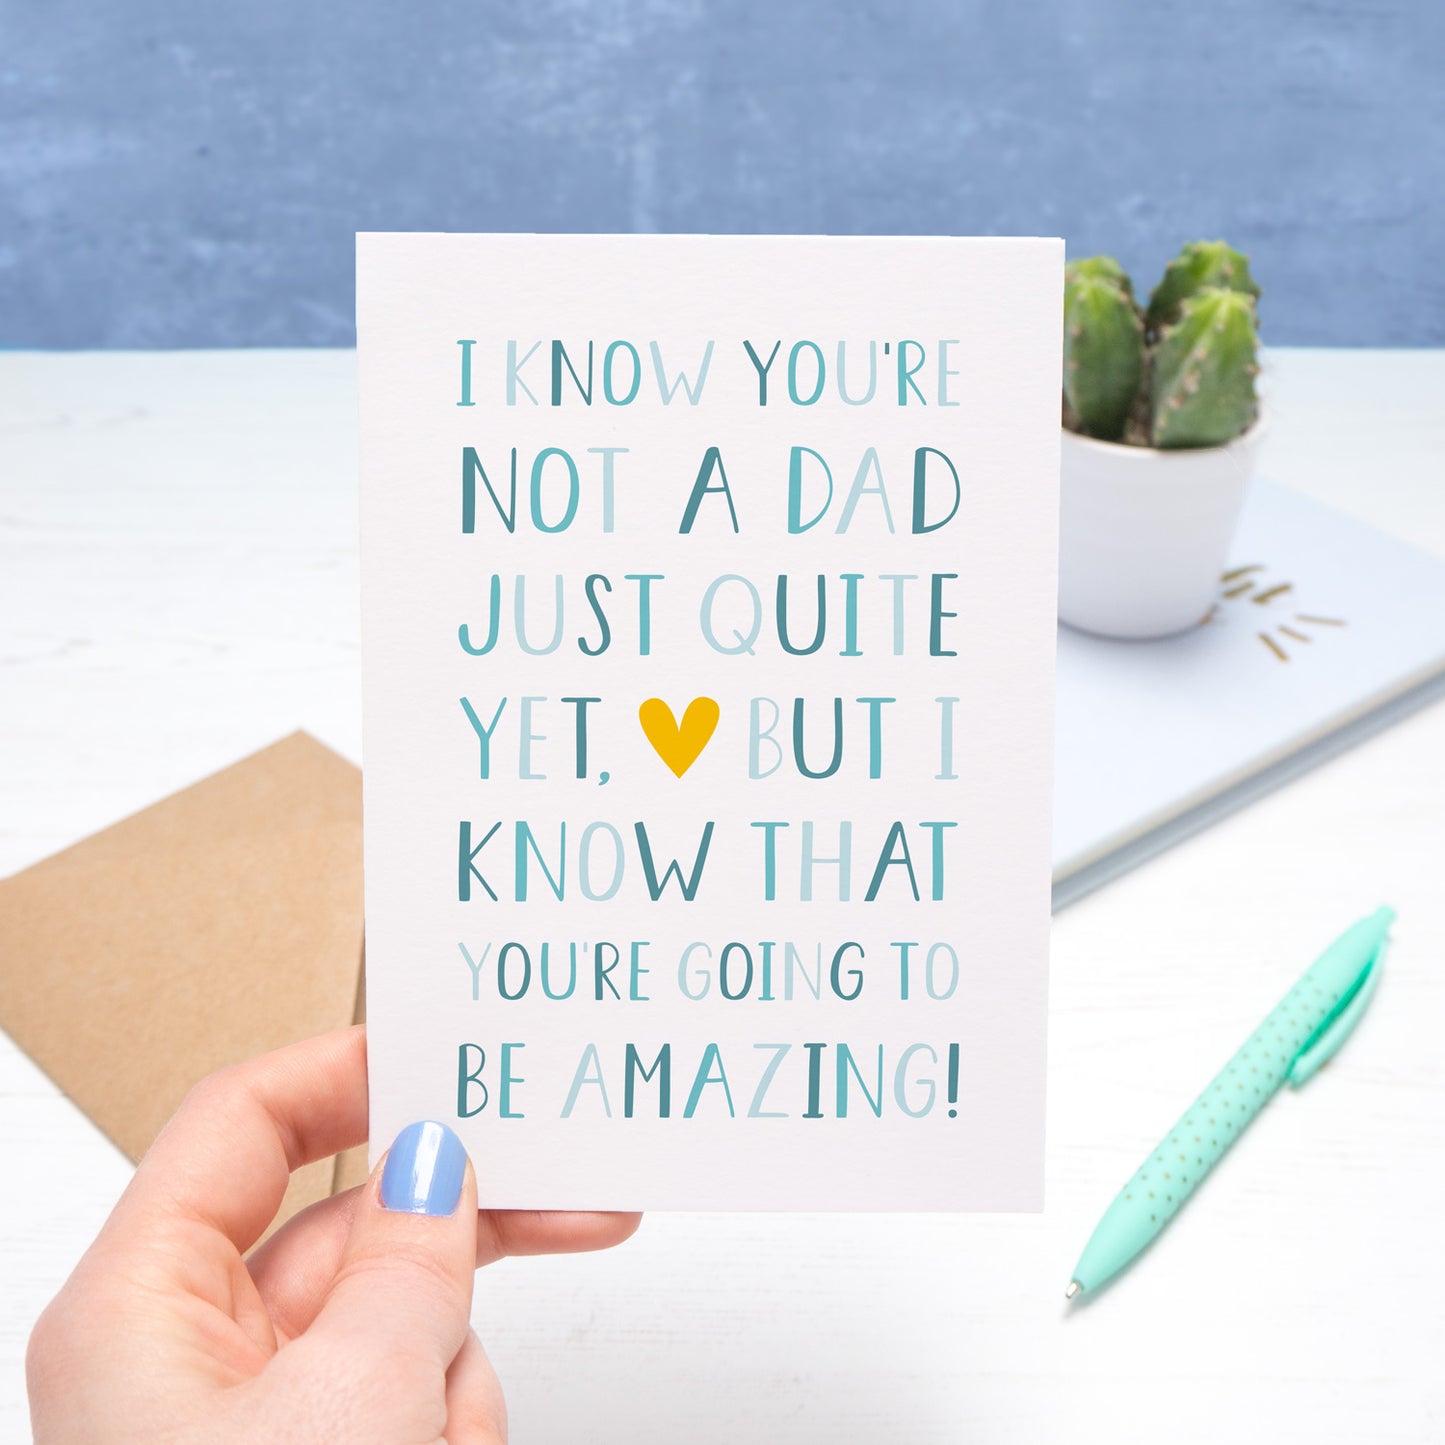 A typographic father's day card by Joanne Hawker, held on a white and blue background. The card reads "I know you're not a dad just quite yet but I know that you're going to be amazing". The letters are in varying tones of blue with a yellow heart near the centre of the card!